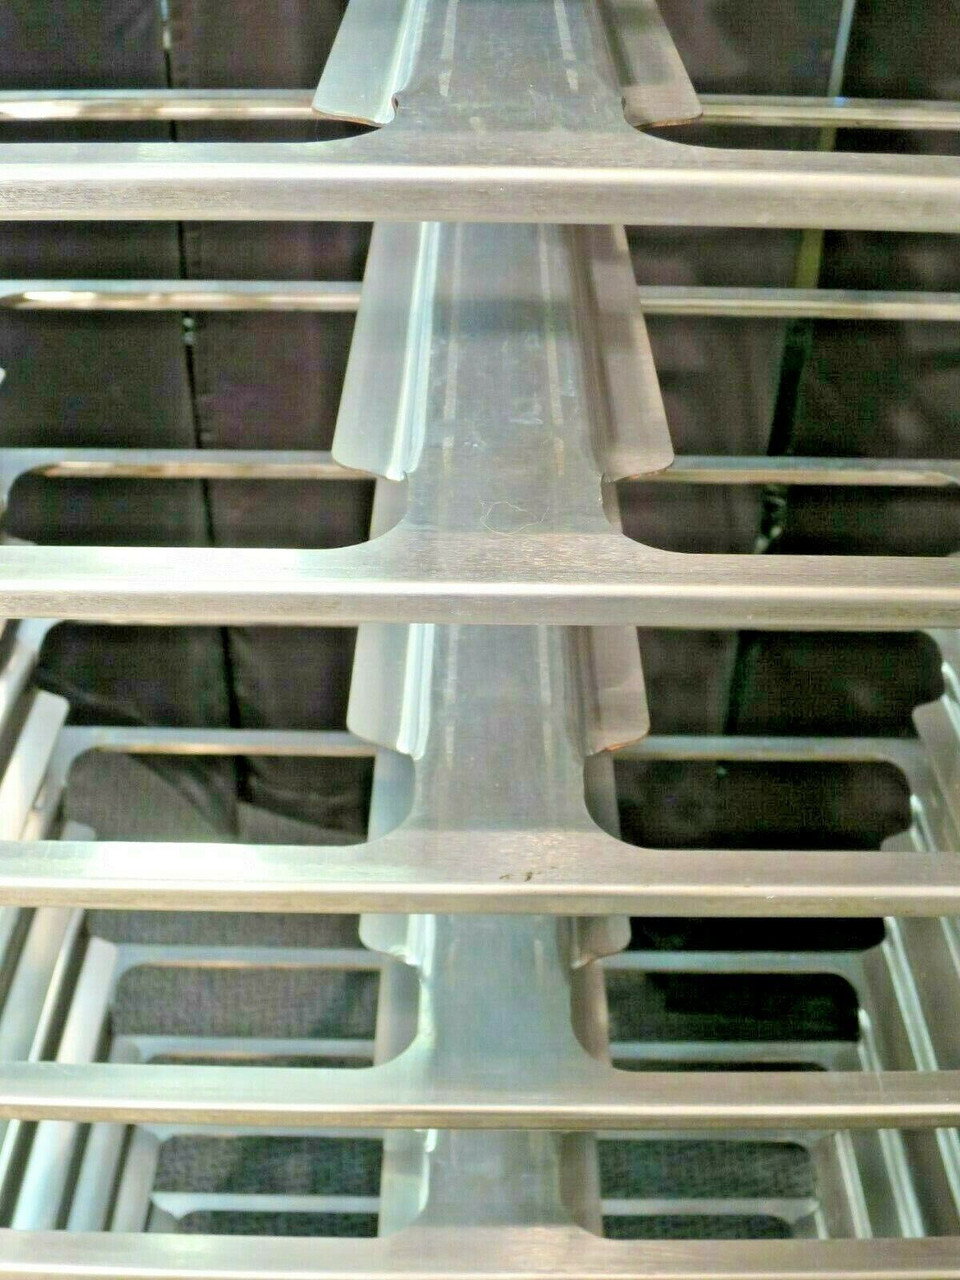 Baxter BSRSBFS-13 Single Roll In Oven Foodservice Rack